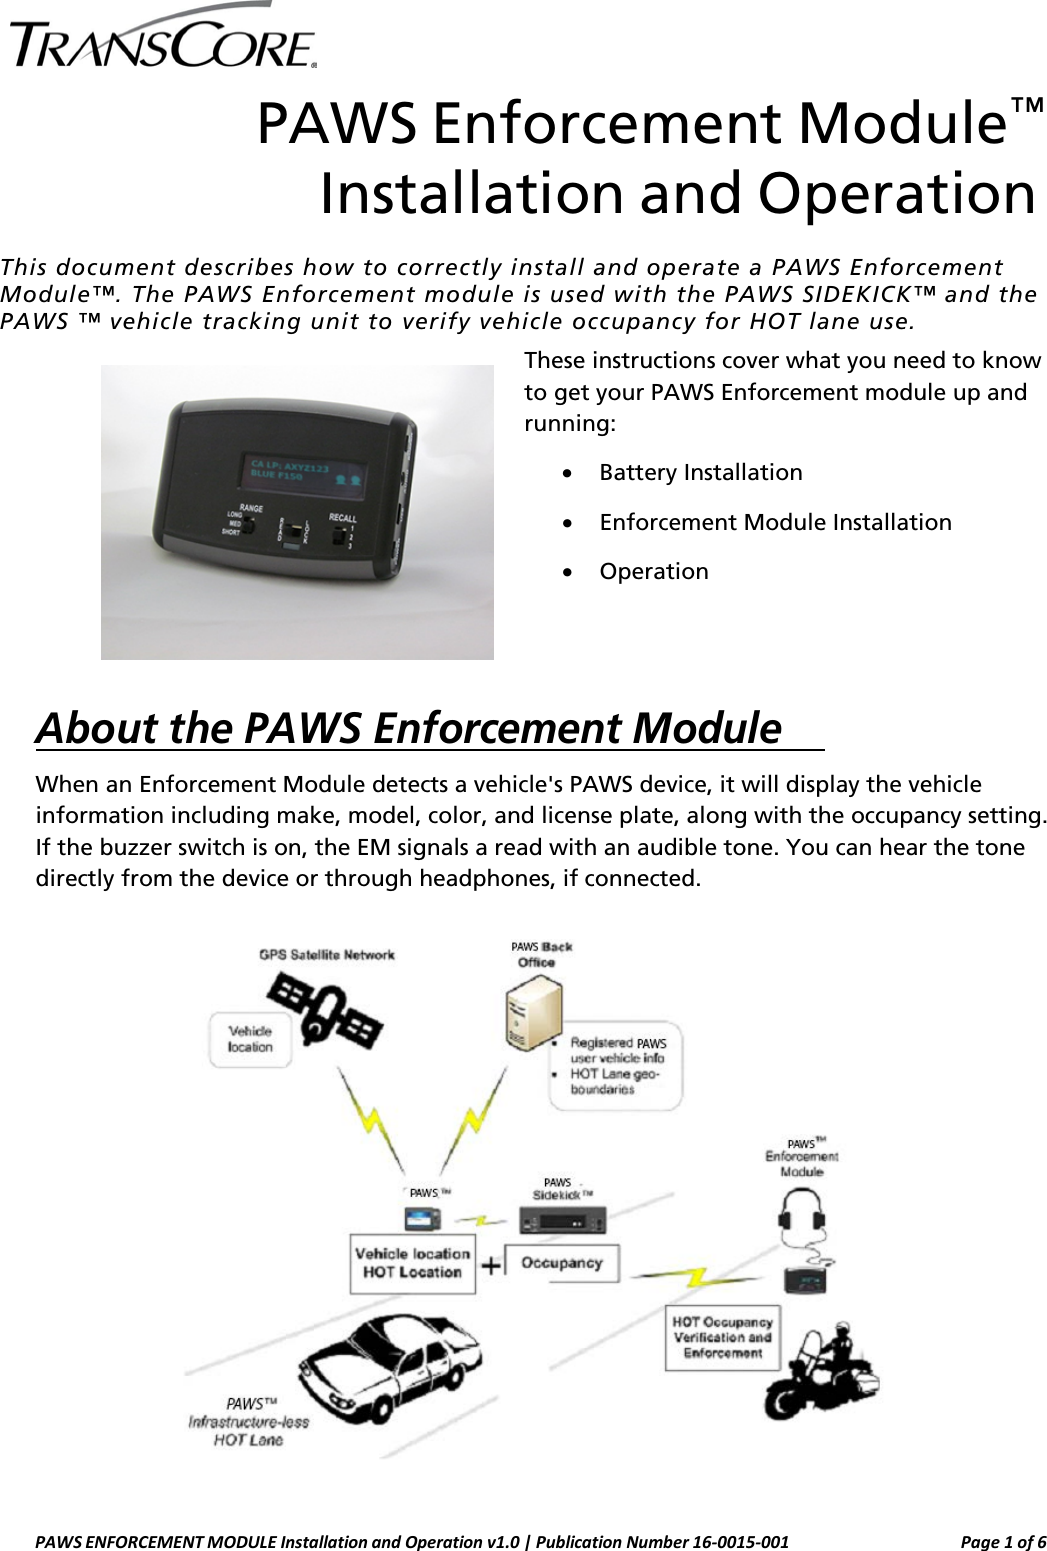   PAWS Enforcement Module™ Installation and Operation This document describes how to correctly install and operate a PAWS Enforcement Module™. The PAWS Enforcement module is used with the PAWS SIDEKICK™ and the PAWS ™ vehicle tracking unit to verify vehicle occupancy for HOT lane use. These instructions cover what you need to know to get your PAWS Enforcement module up and running: • Battery Installation • Enforcement Module Installation • Operation   About the PAWS Enforcement Module    When an Enforcement Module detects a vehicle&apos;s PAWS device, it will display the vehicle information including make, model, color, and license plate, along with the occupancy setting. If the buzzer switch is on, the EM signals a read with an audible tone. You can hear the tone directly from the device or through headphones, if connected.   PAWS ENFORCEMENT MODULE Installation and Operation v1.0 | Publication Number 16-0015-001 Page 1 of 6  